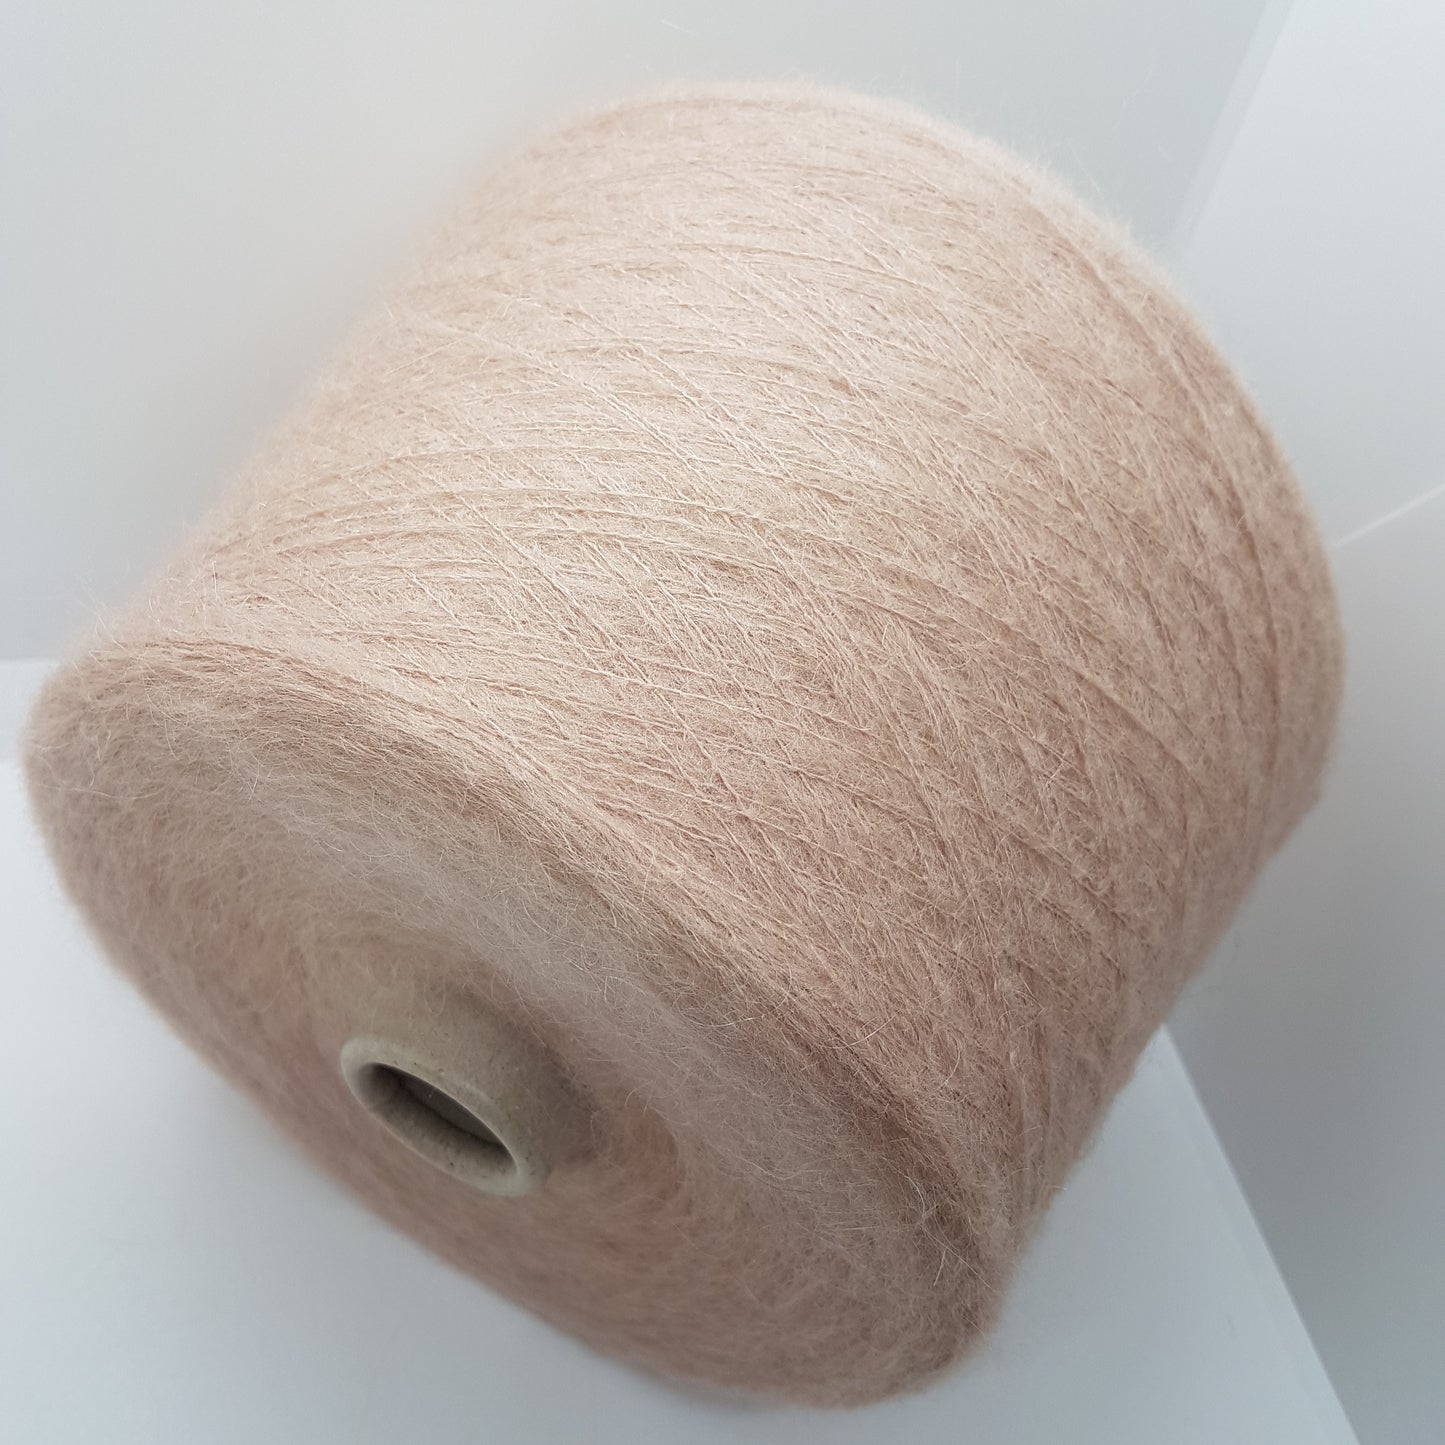 100g Mohair hilo italiano suave color Beige Nude N.236